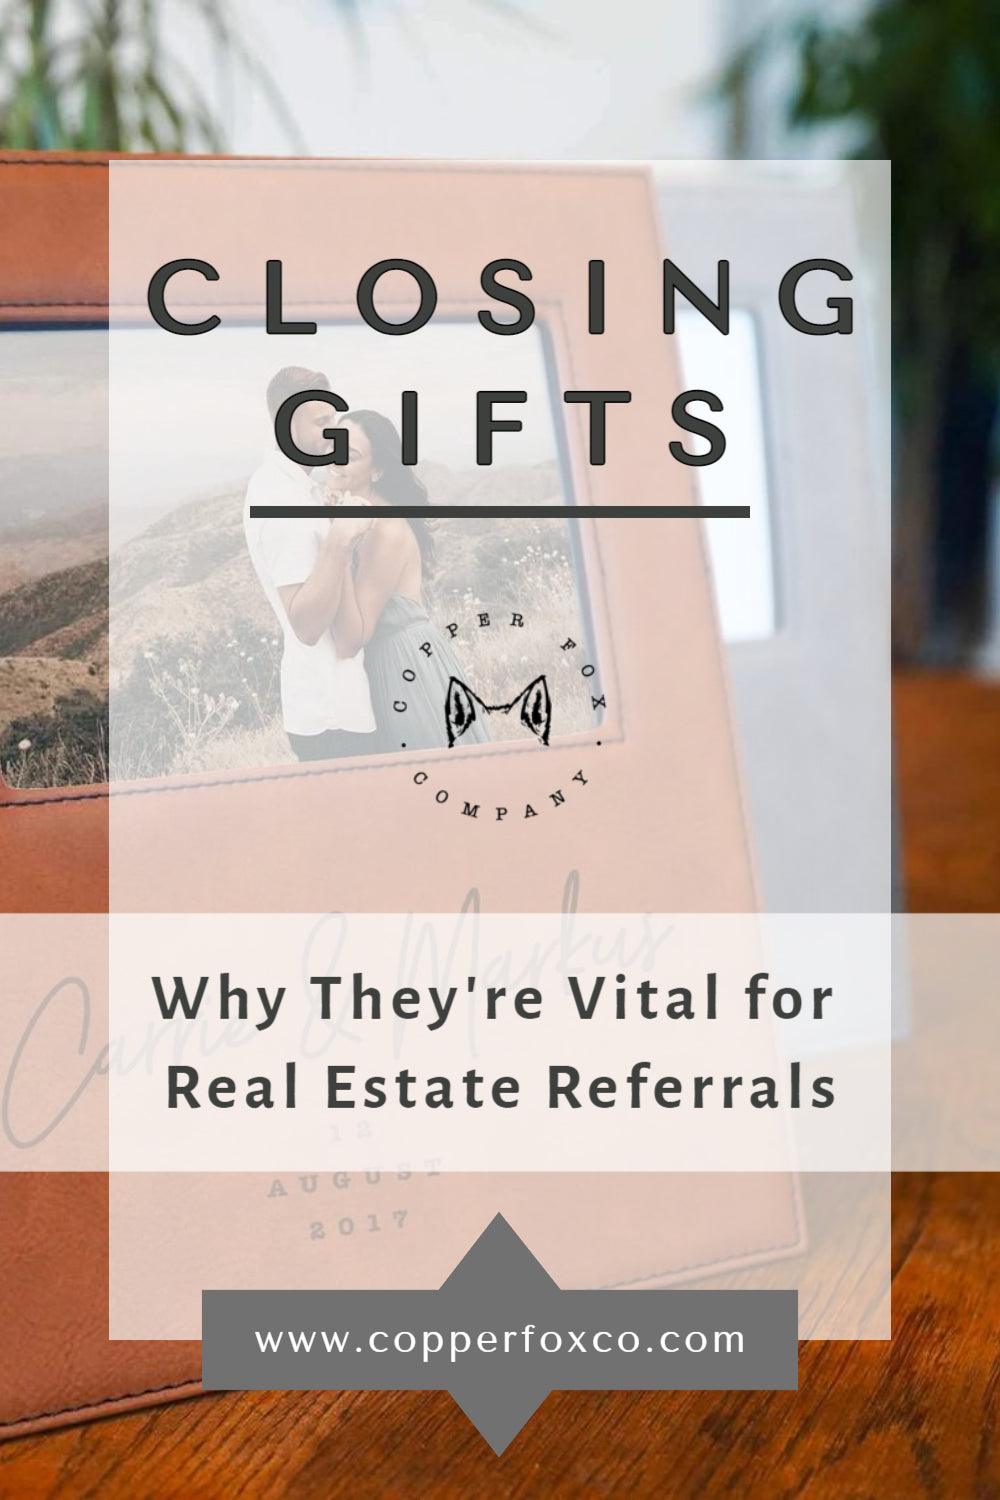 🎬Behind the Scenes Client Closing Gift Shopping! Unparalleled Real Es